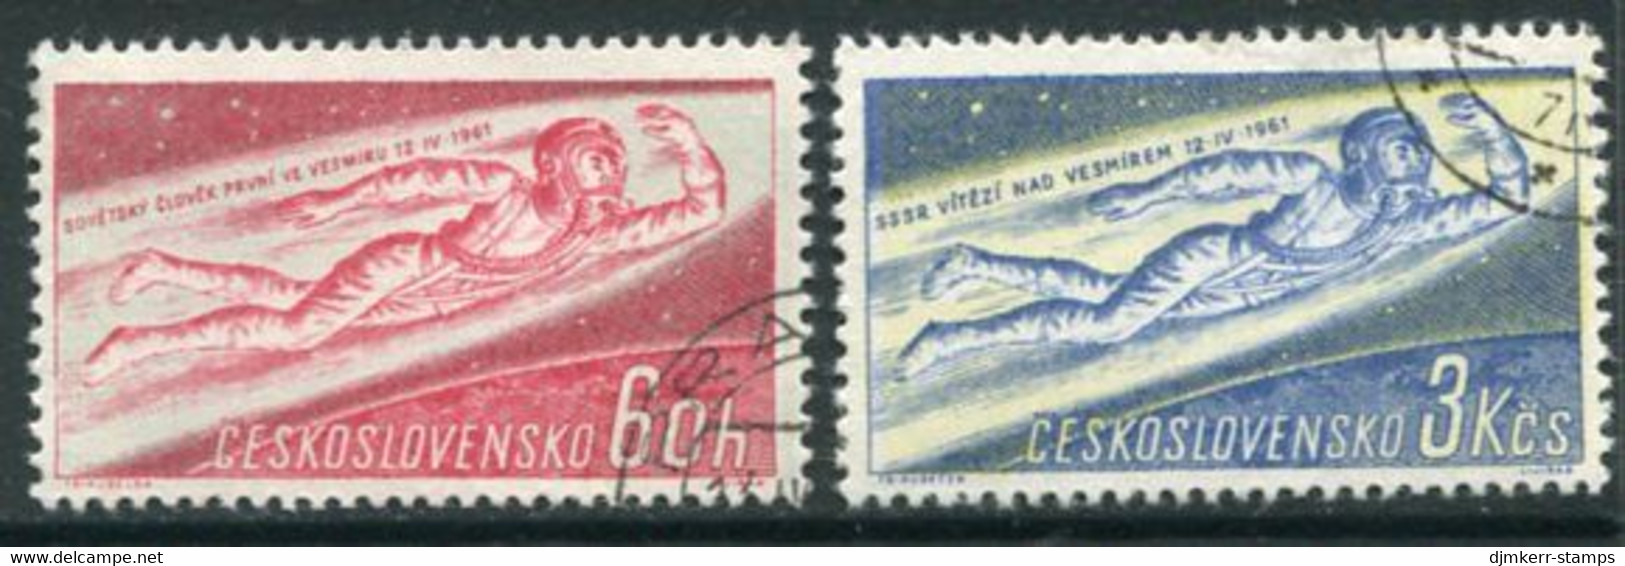 CZECHOSLOVAKIA 1961 Launch Of Manned Space Flight Used.  Michel 1263-64 - Used Stamps